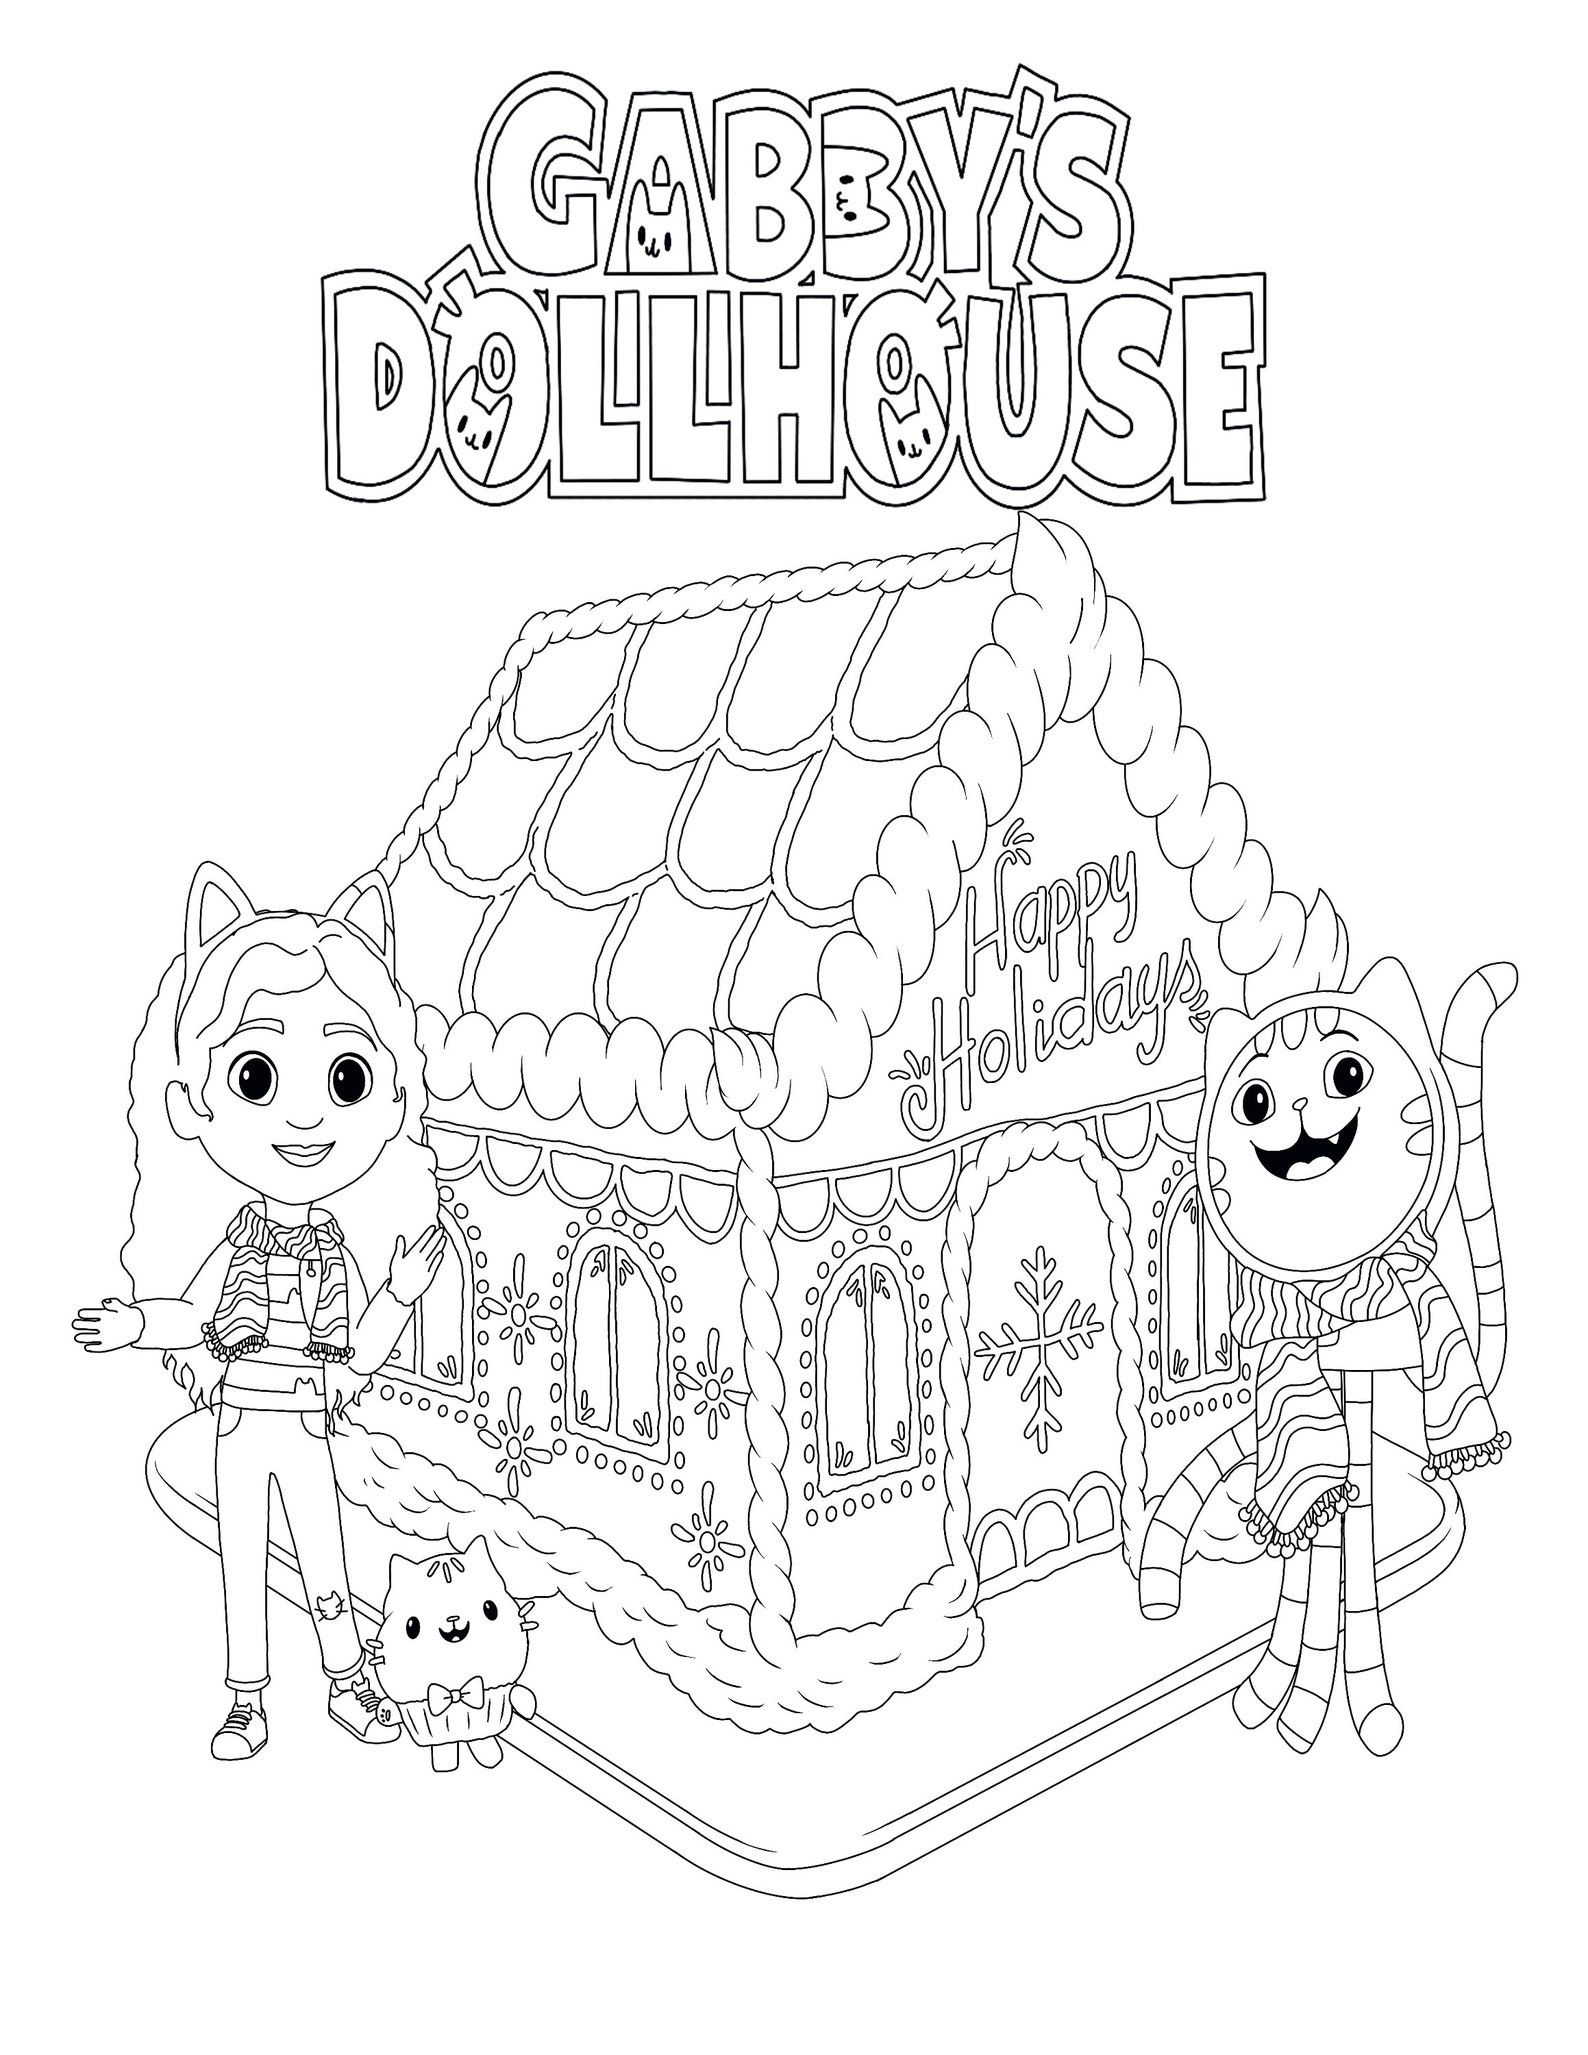 gabbys-dollhouse-holiday-coloring-page-printable-download-etsy